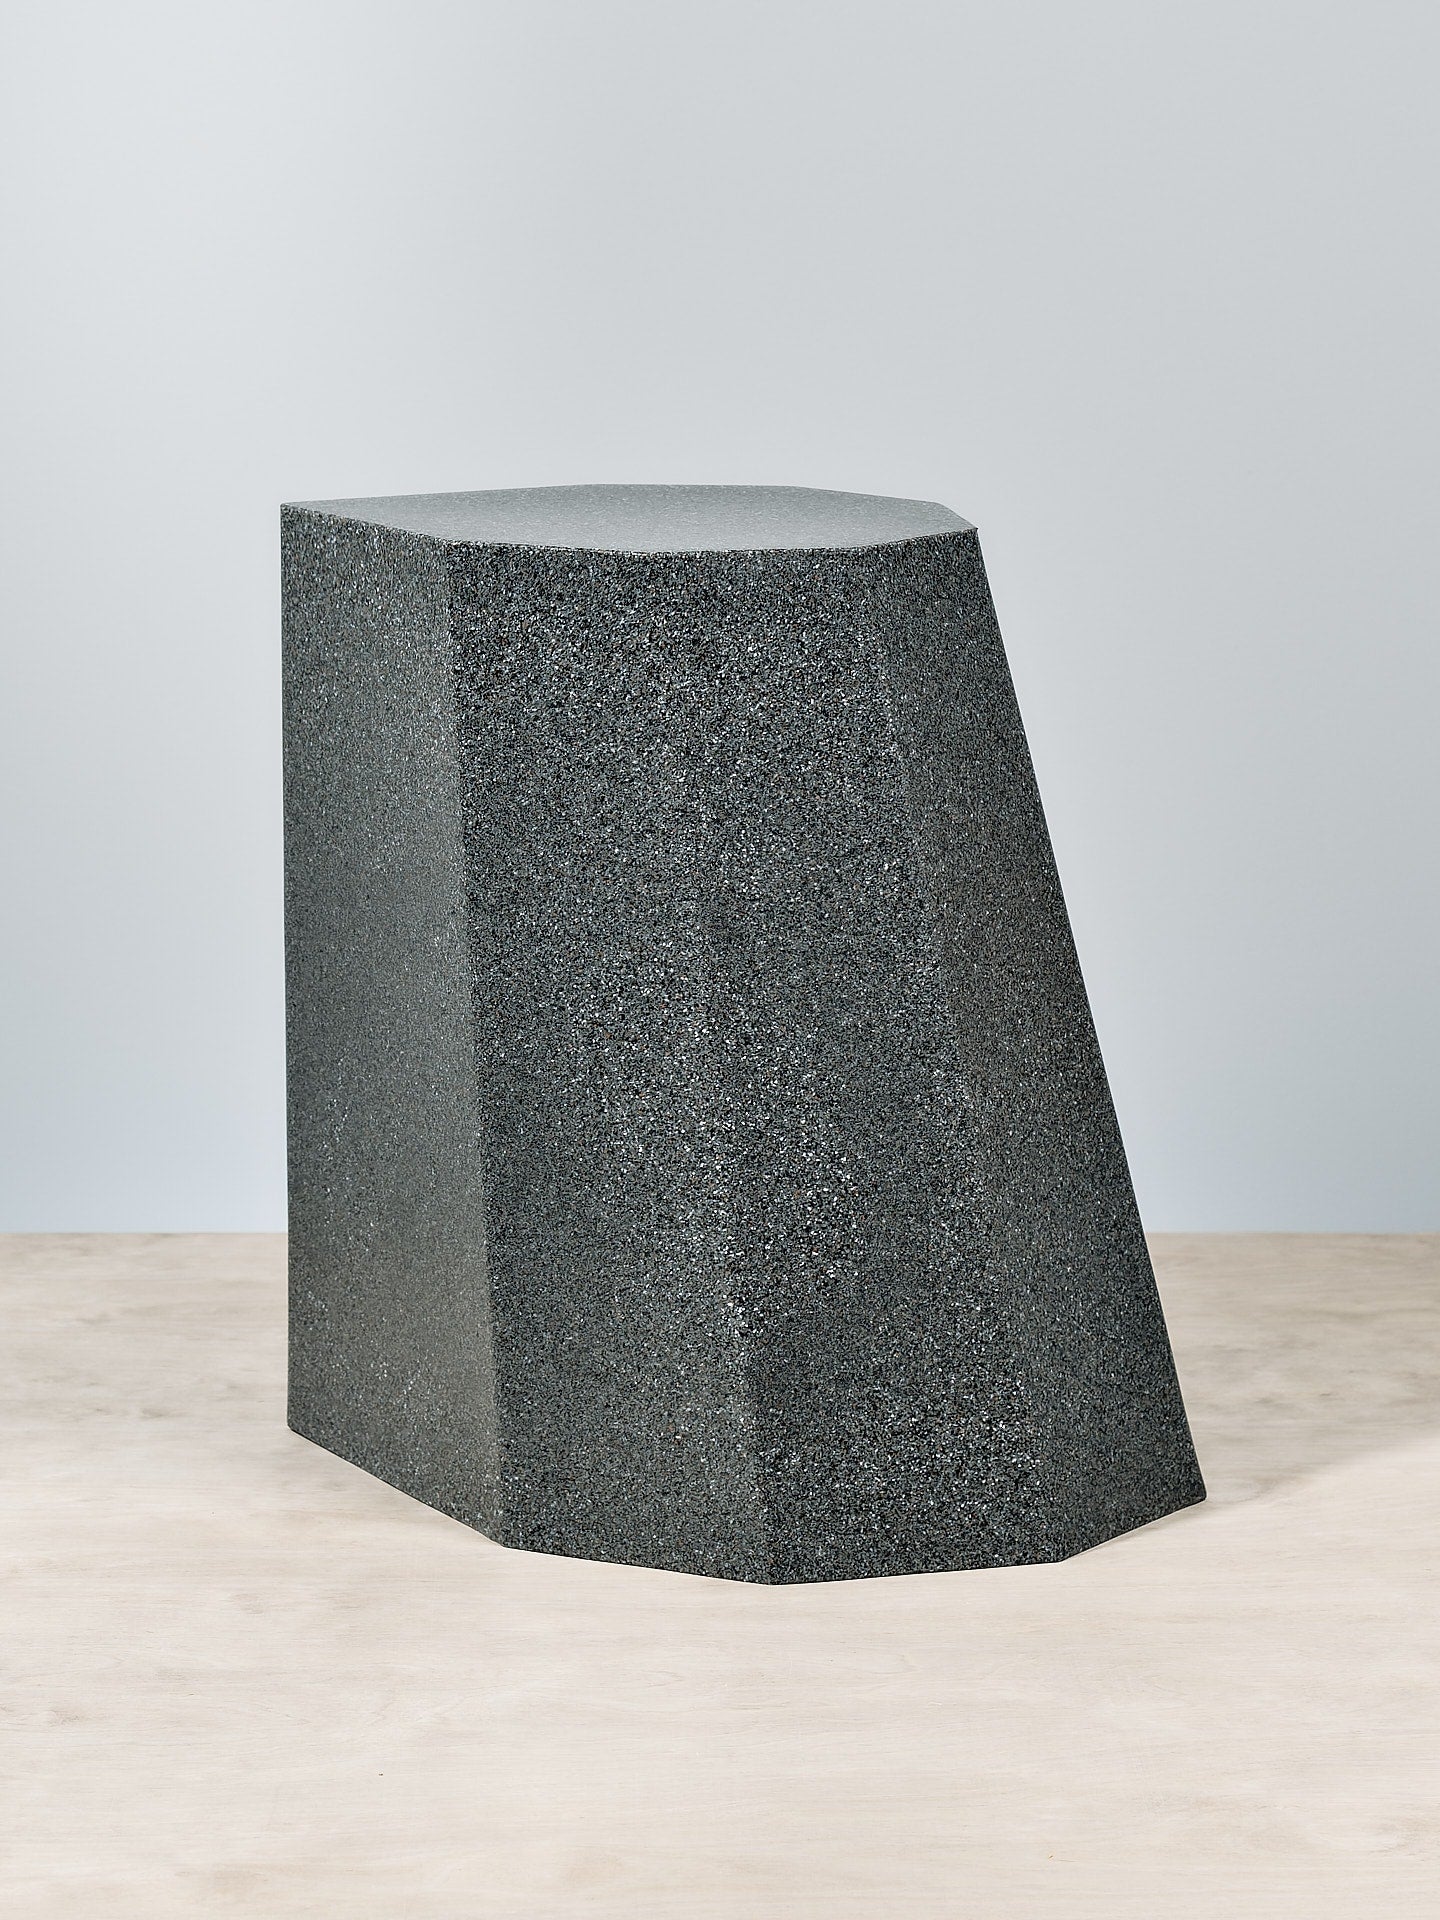 A Martino Gamper Arnold Circus Stool – Speckle Grey on a wooden floor.